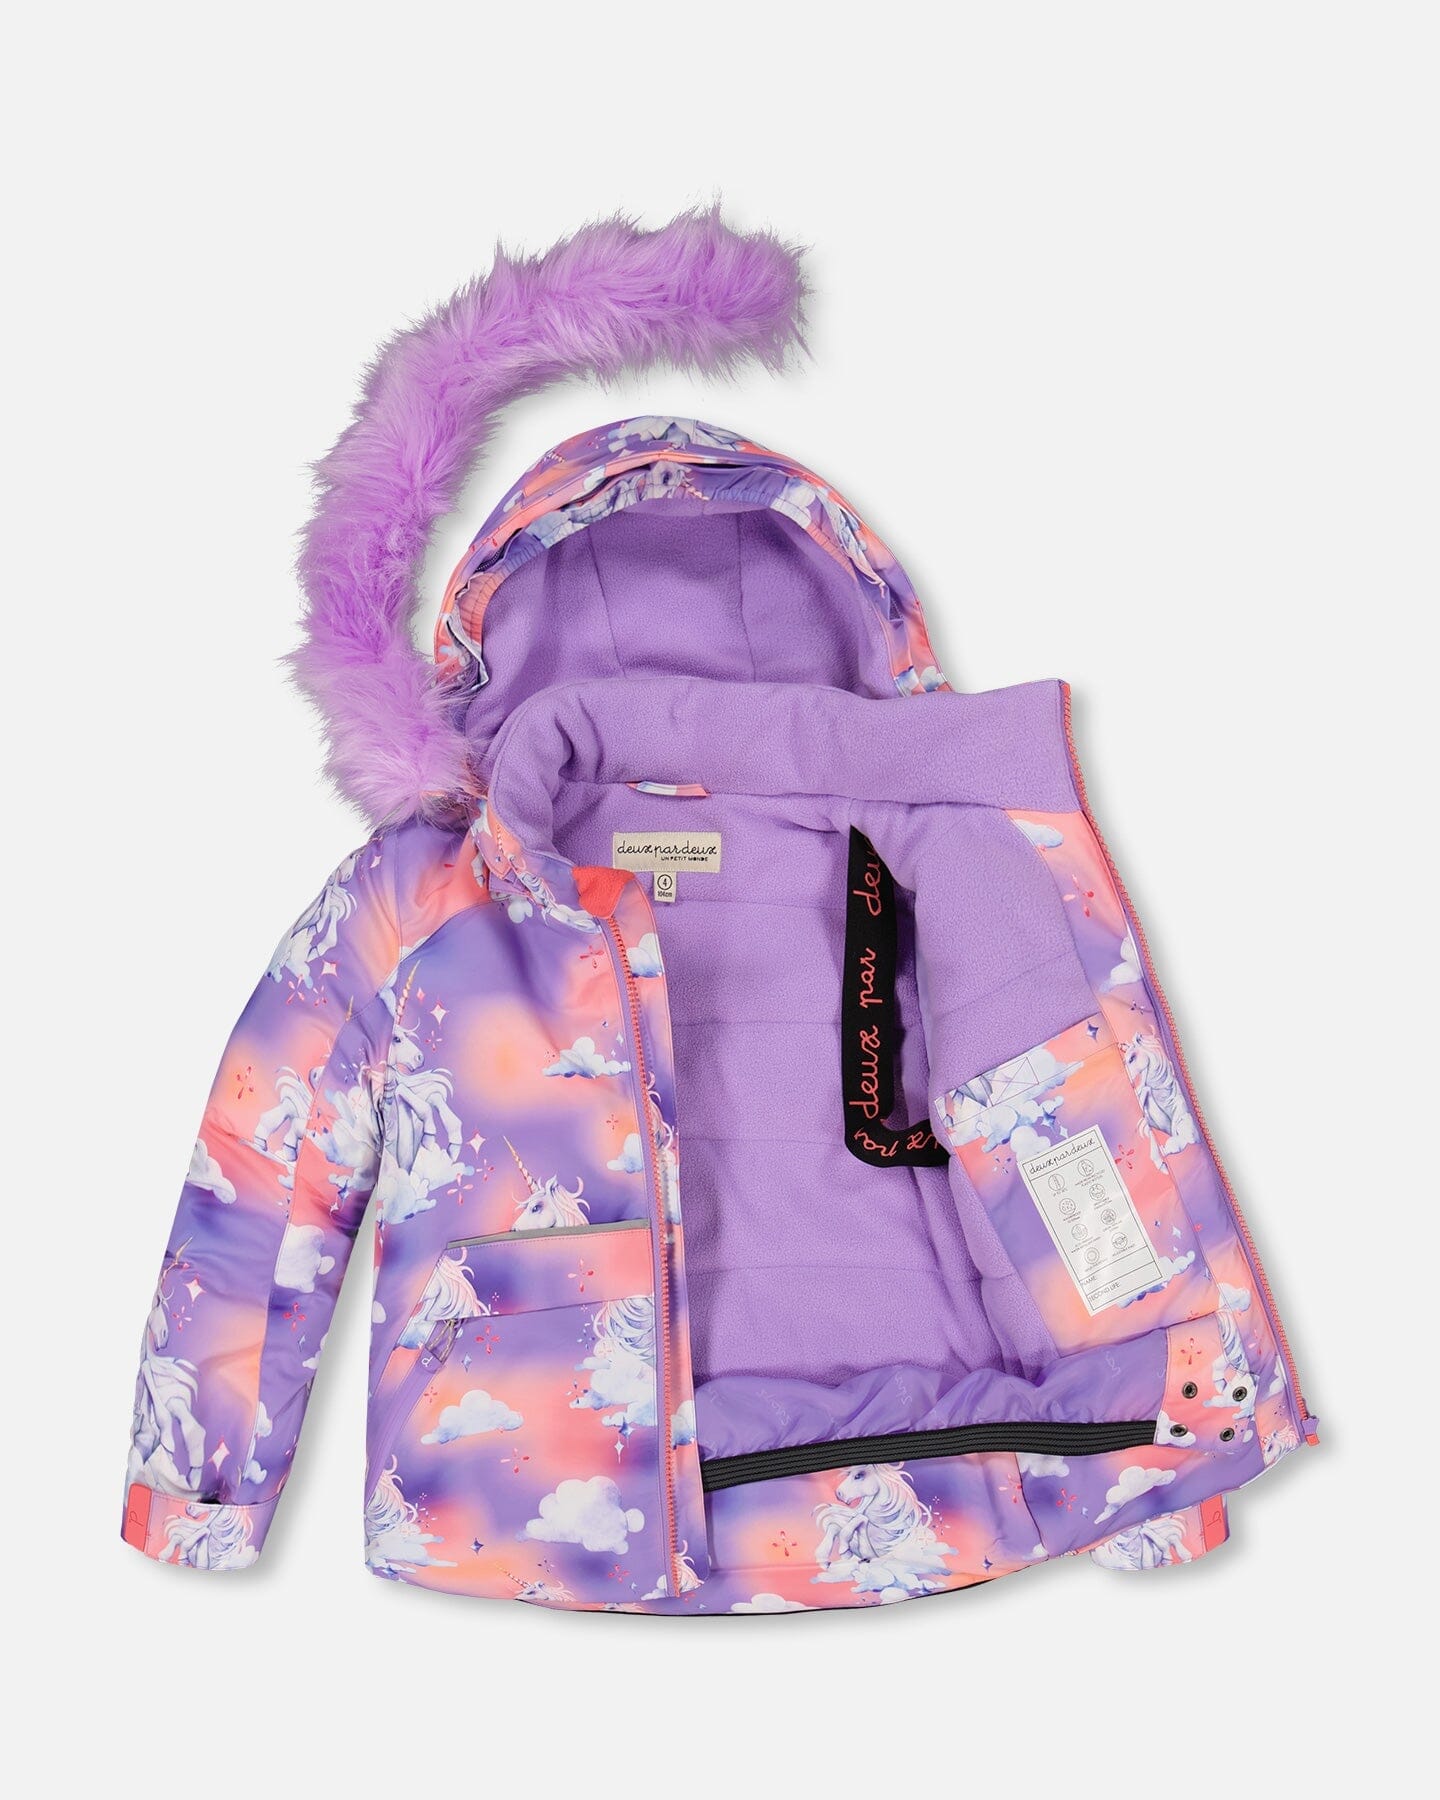 Two Piece Snowsuit Nightshadow Blue With Unicorns In The Cloud Print - F10D802_976